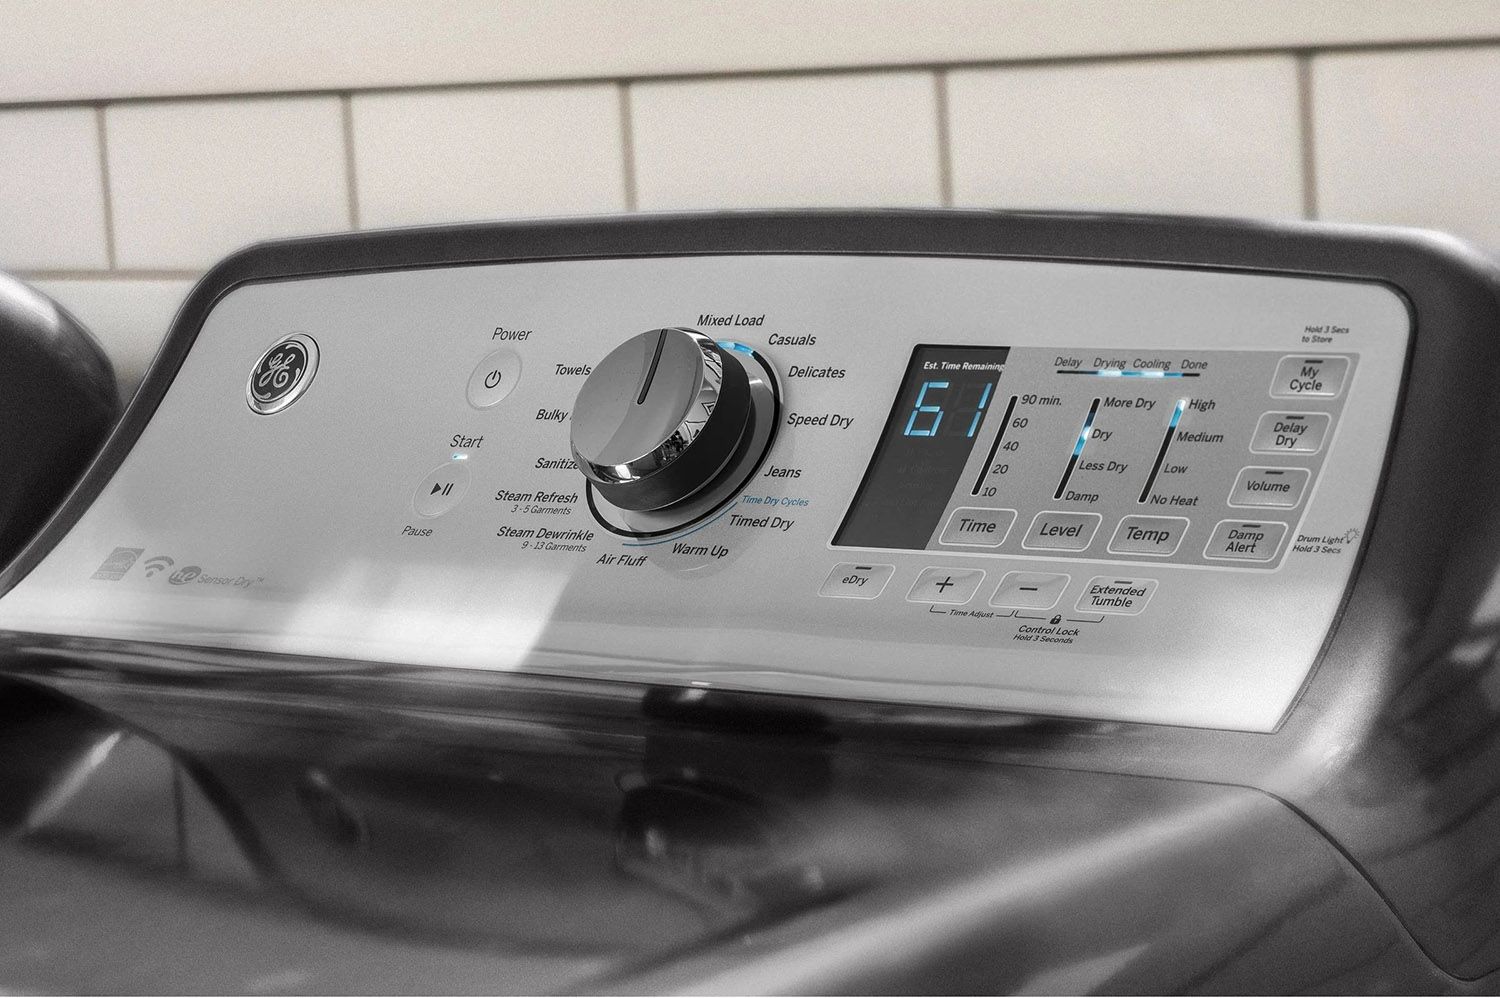 How To Fix The Error Code E71 For GE Dryer